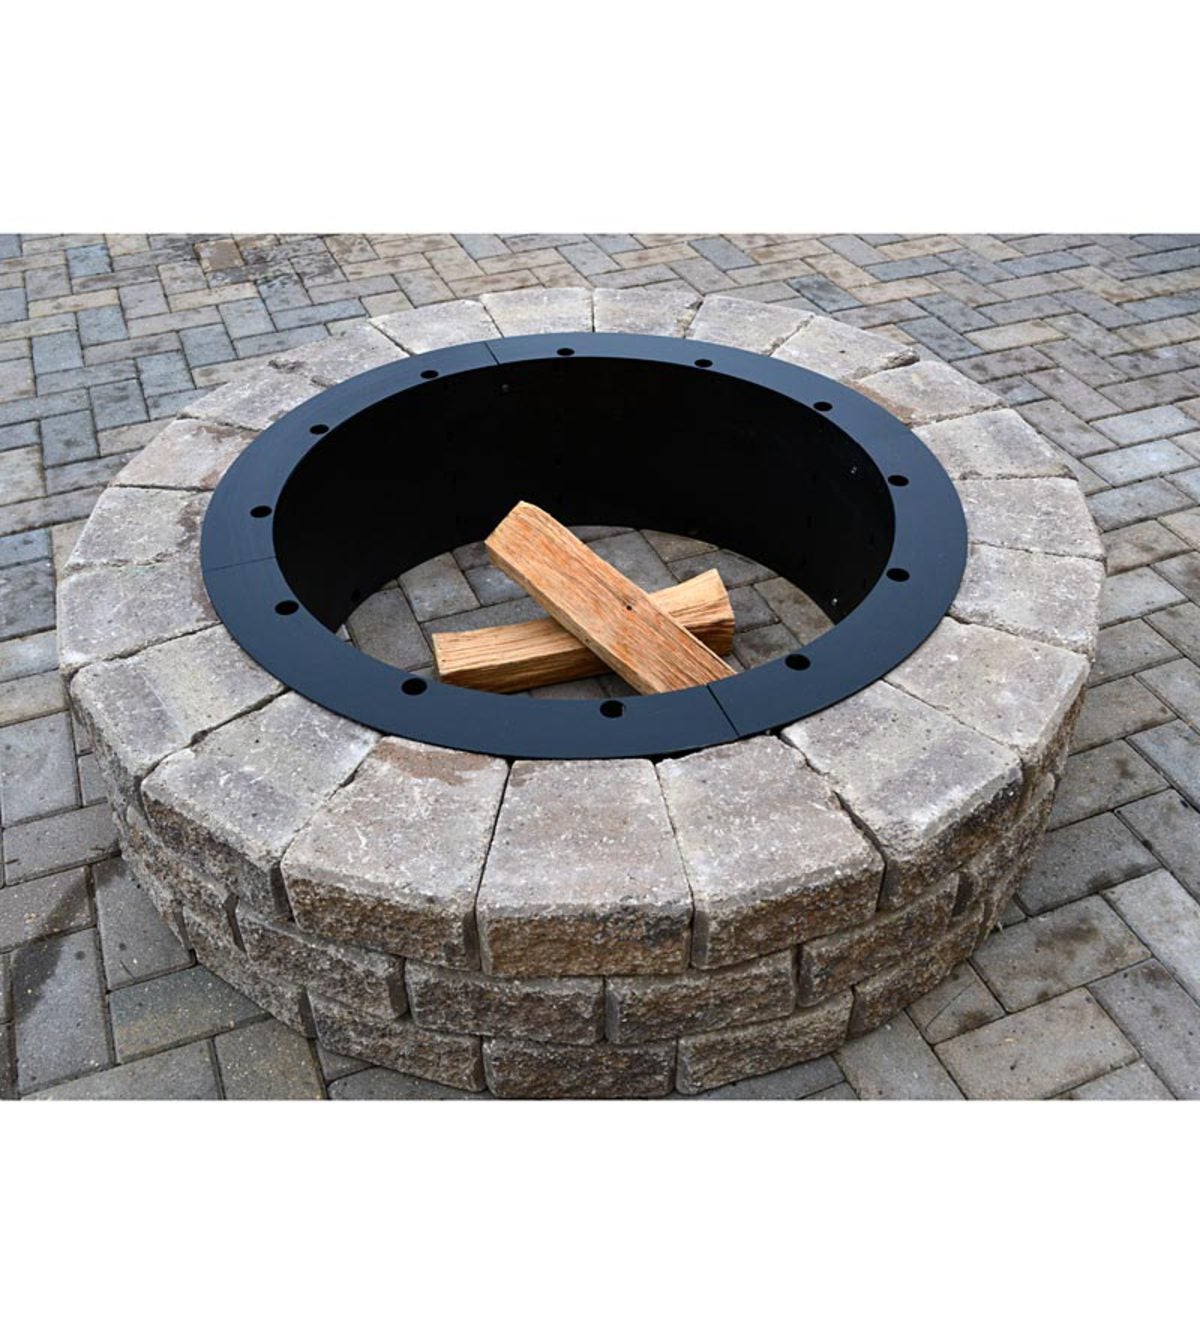 American-Made 36”Round Fire Pit Insert